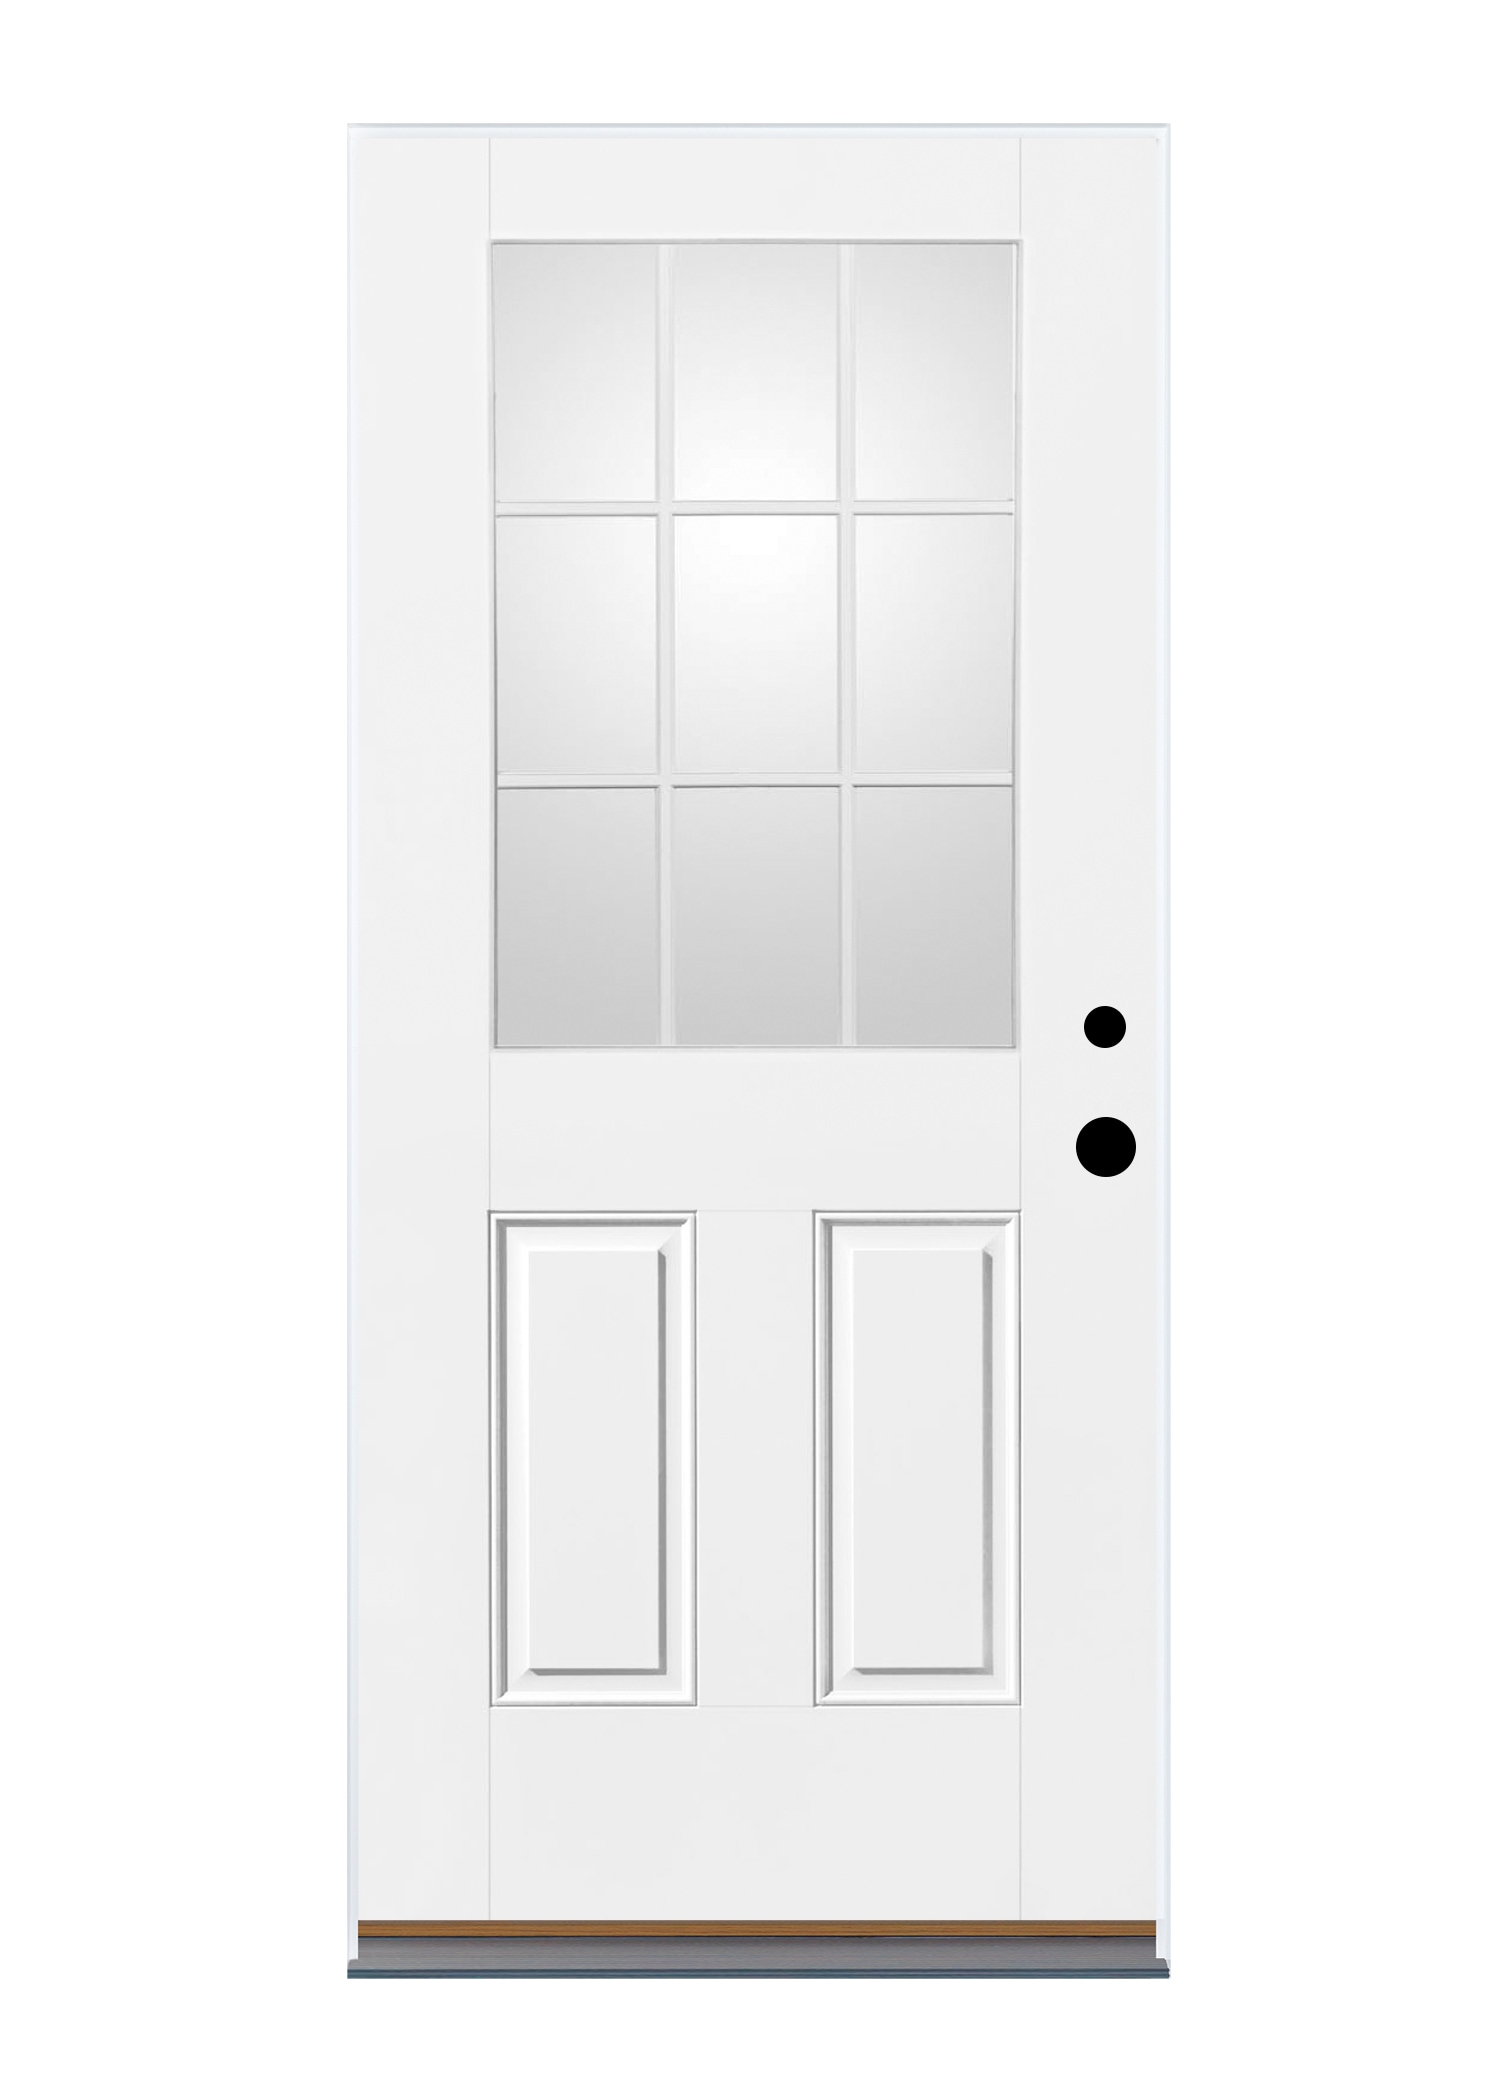 Therma-Tru Benchmark Doors 32-in x 80-in Fiberglass Half Lite Right-Hand Outswing Ready To Paint Prehung Single Front Door Insulating Core in White -  SSCD4E28RNBOS